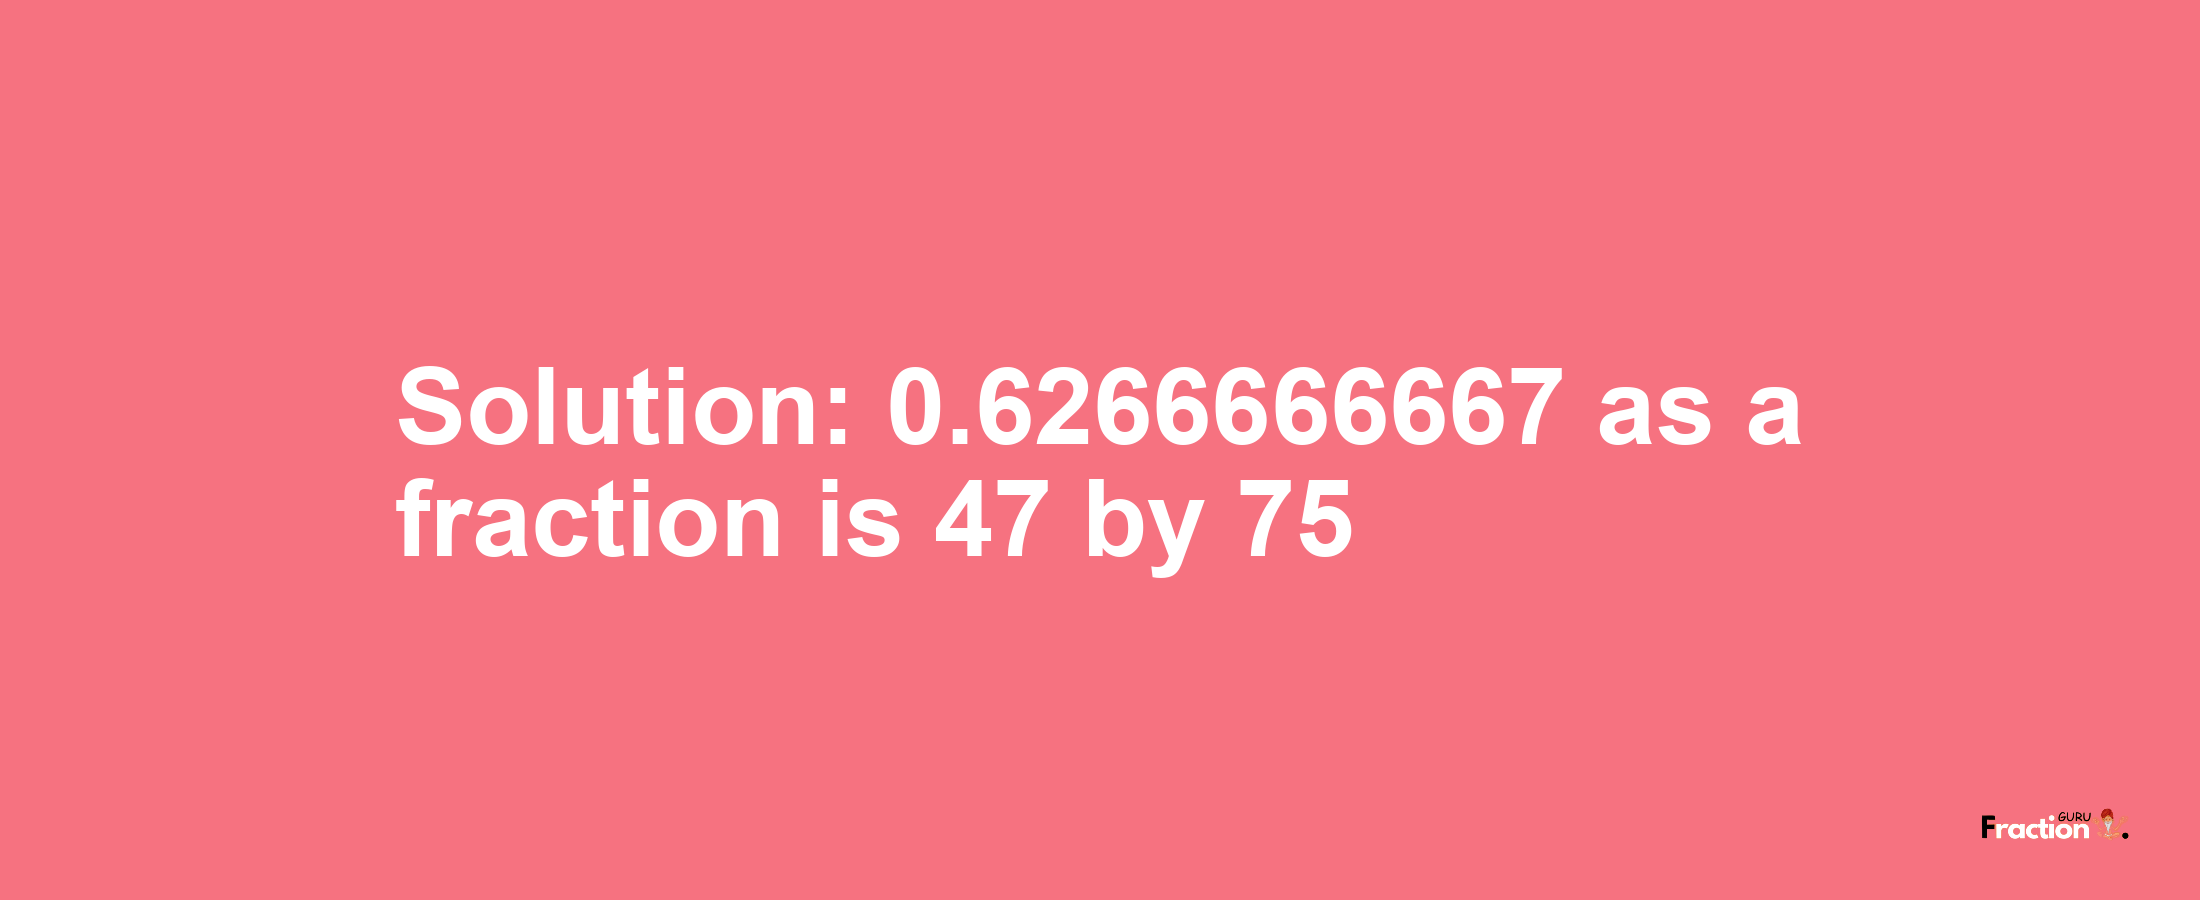 Solution:0.6266666667 as a fraction is 47/75